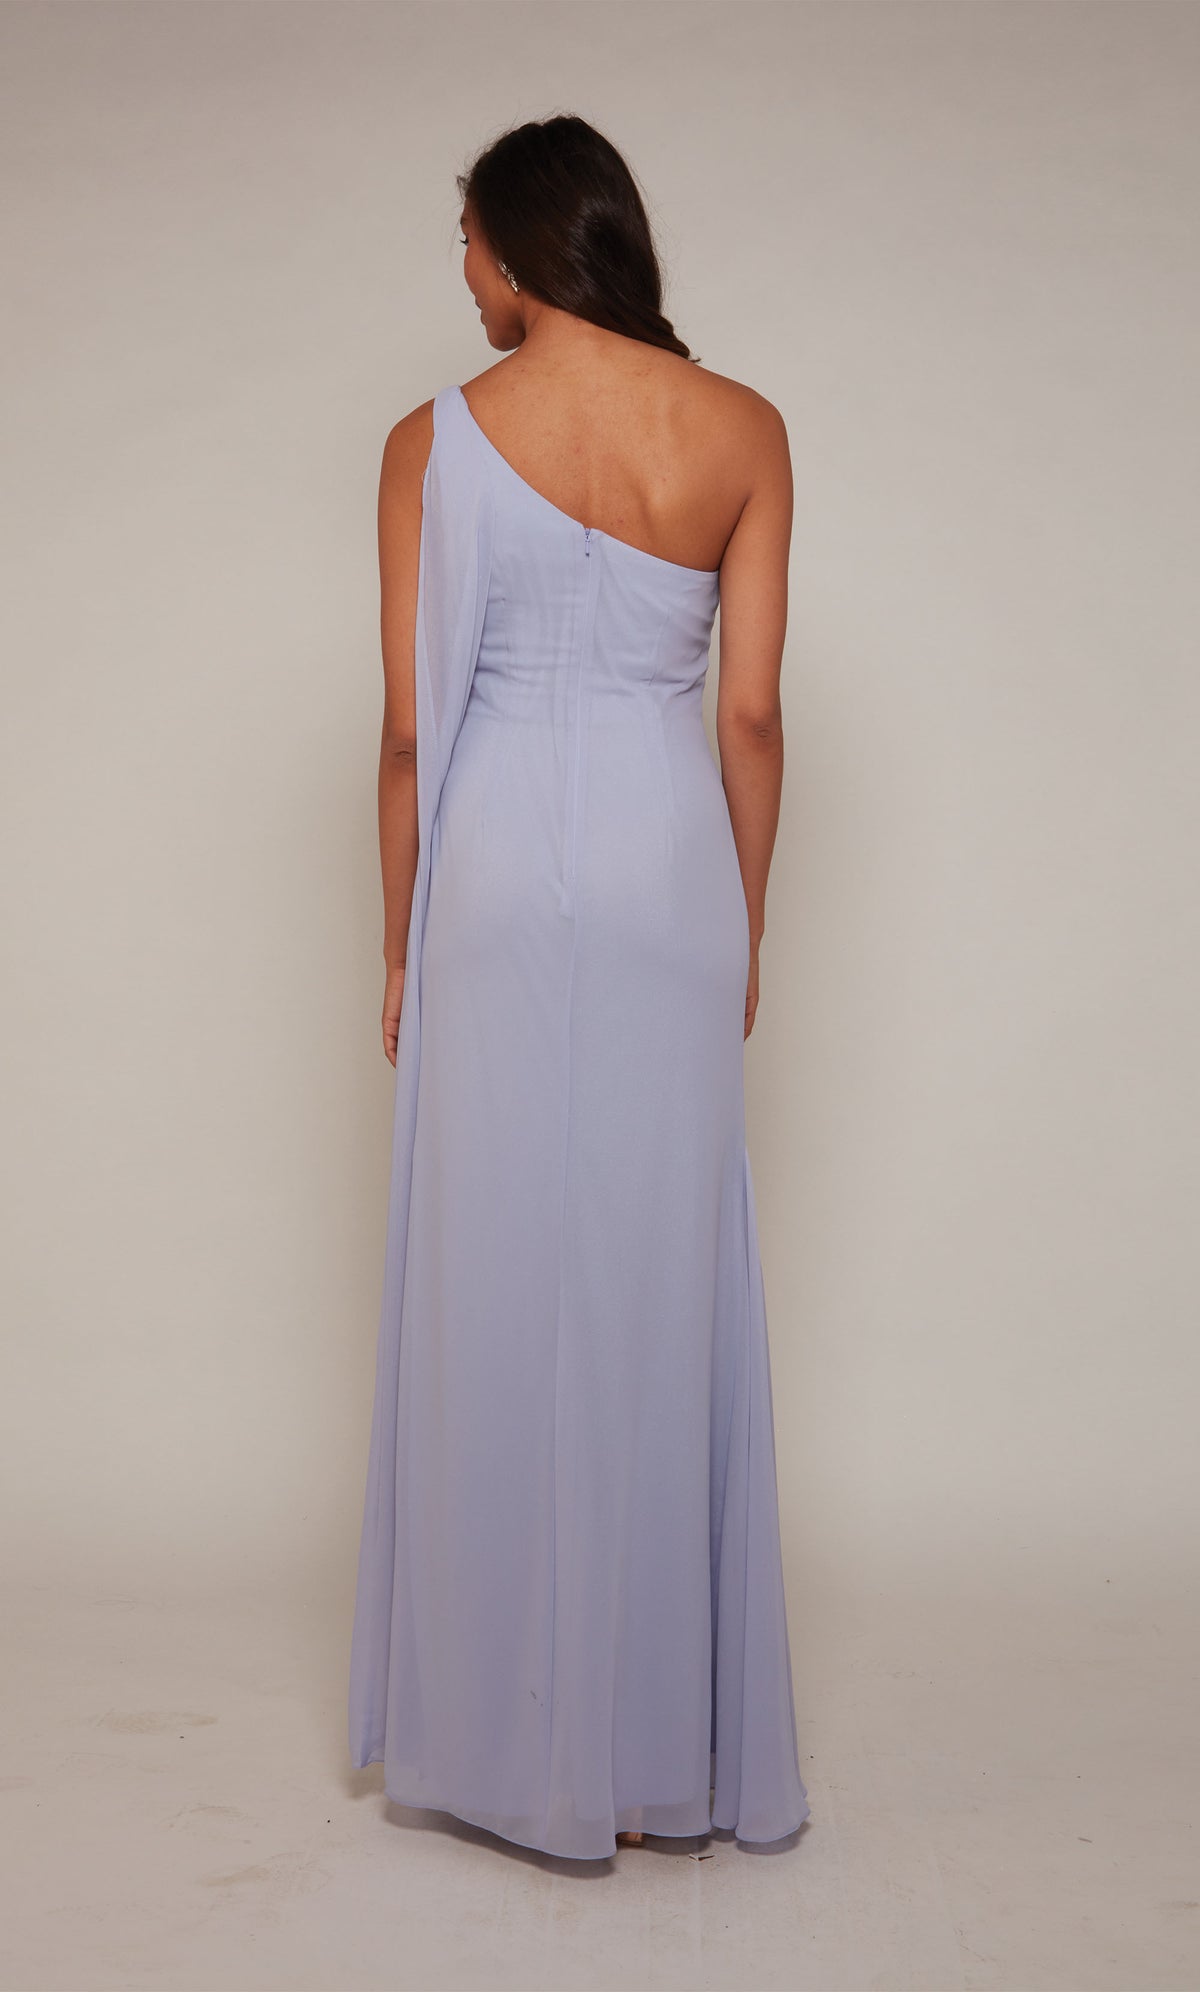 One shoulder drape dress with an closed zipper back in light periwinkle.